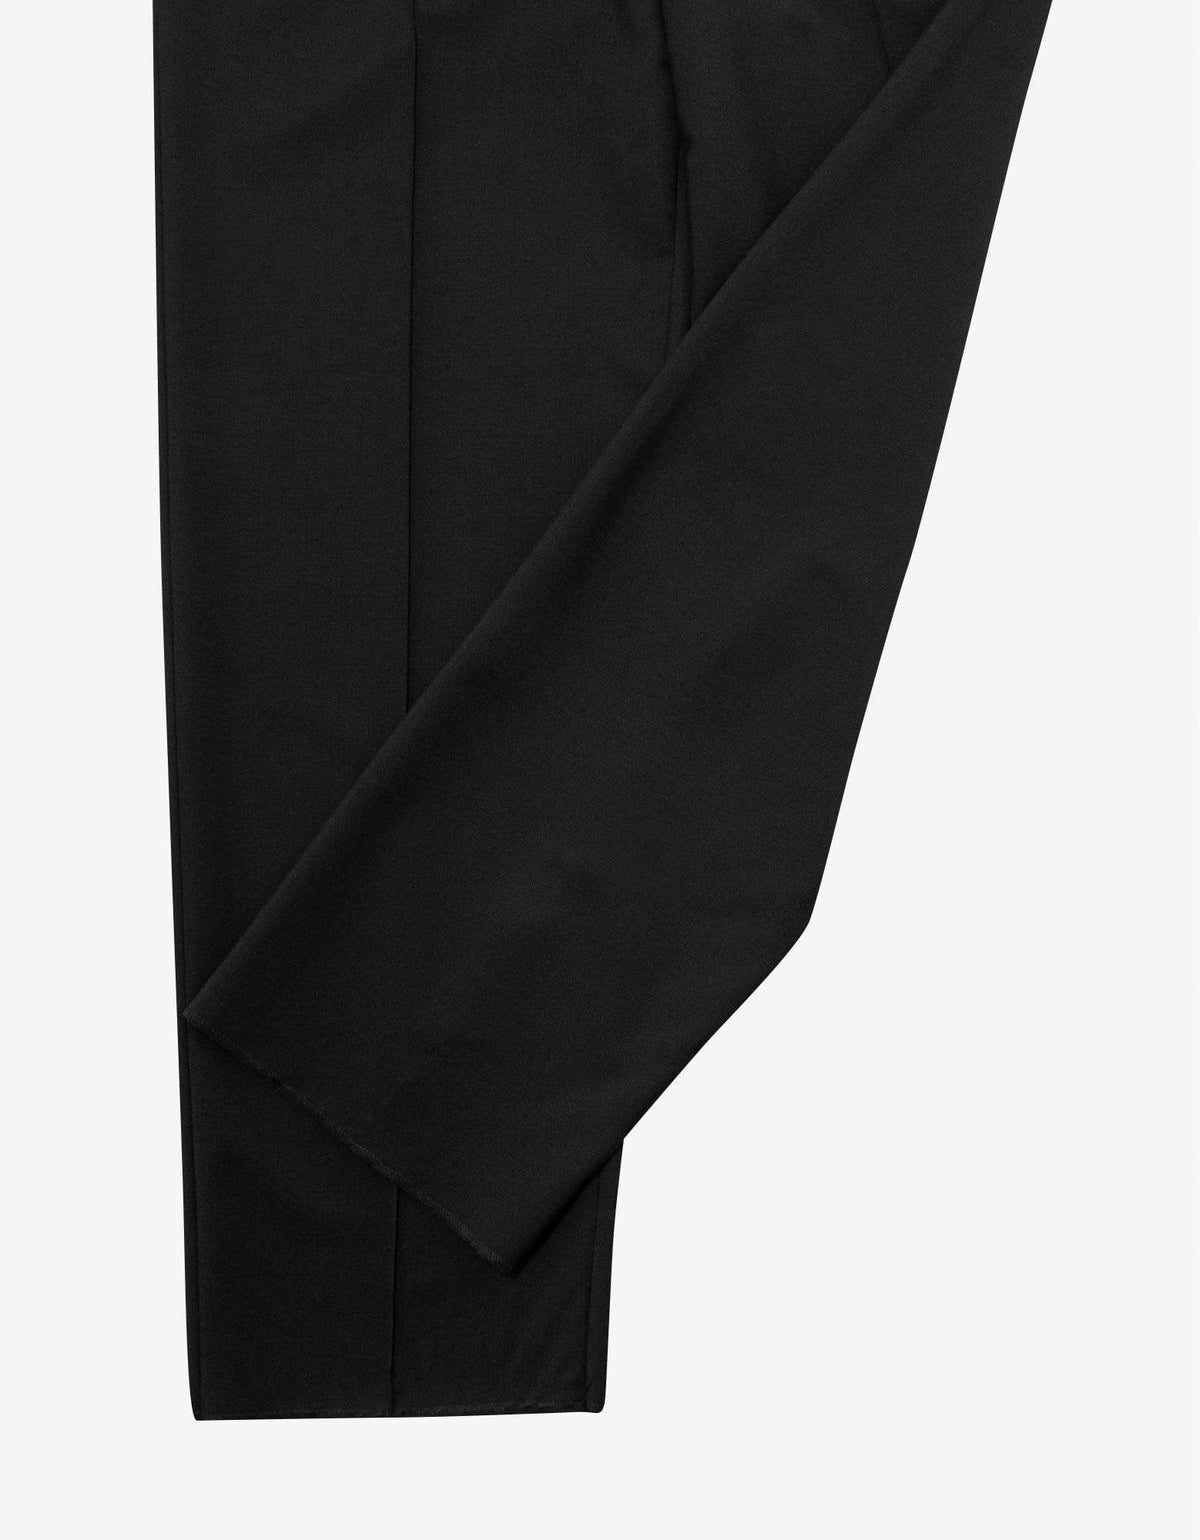 Valentino Black Mohair Trousers